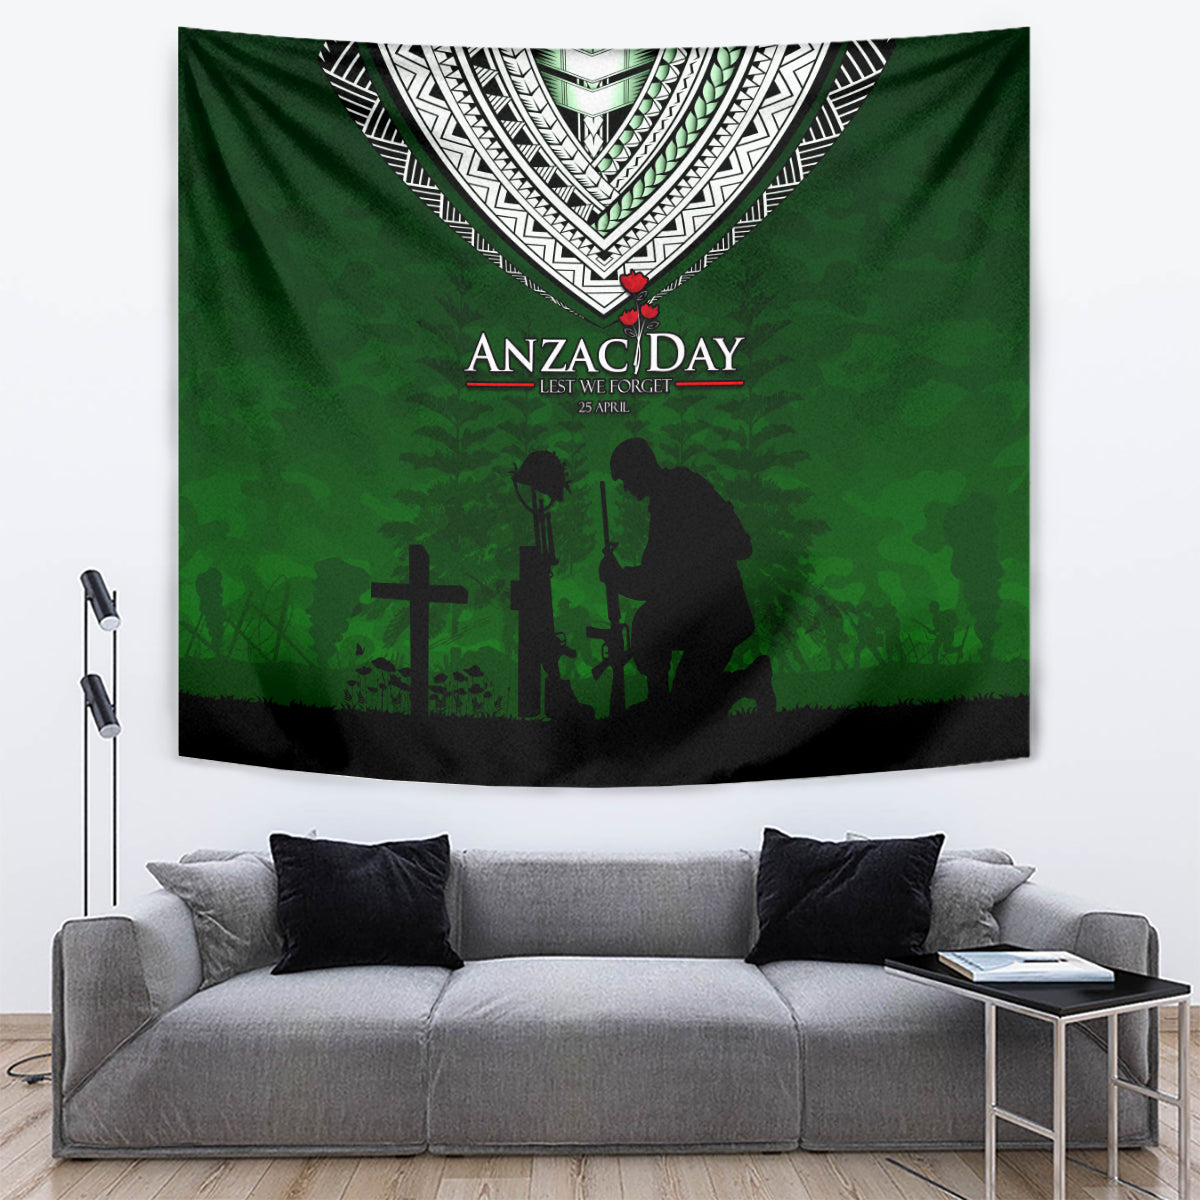 Norfolk Island ANZAC Day Tapestry Soldier Lest We Forget Camouflage LT03 Green - Polynesian Pride